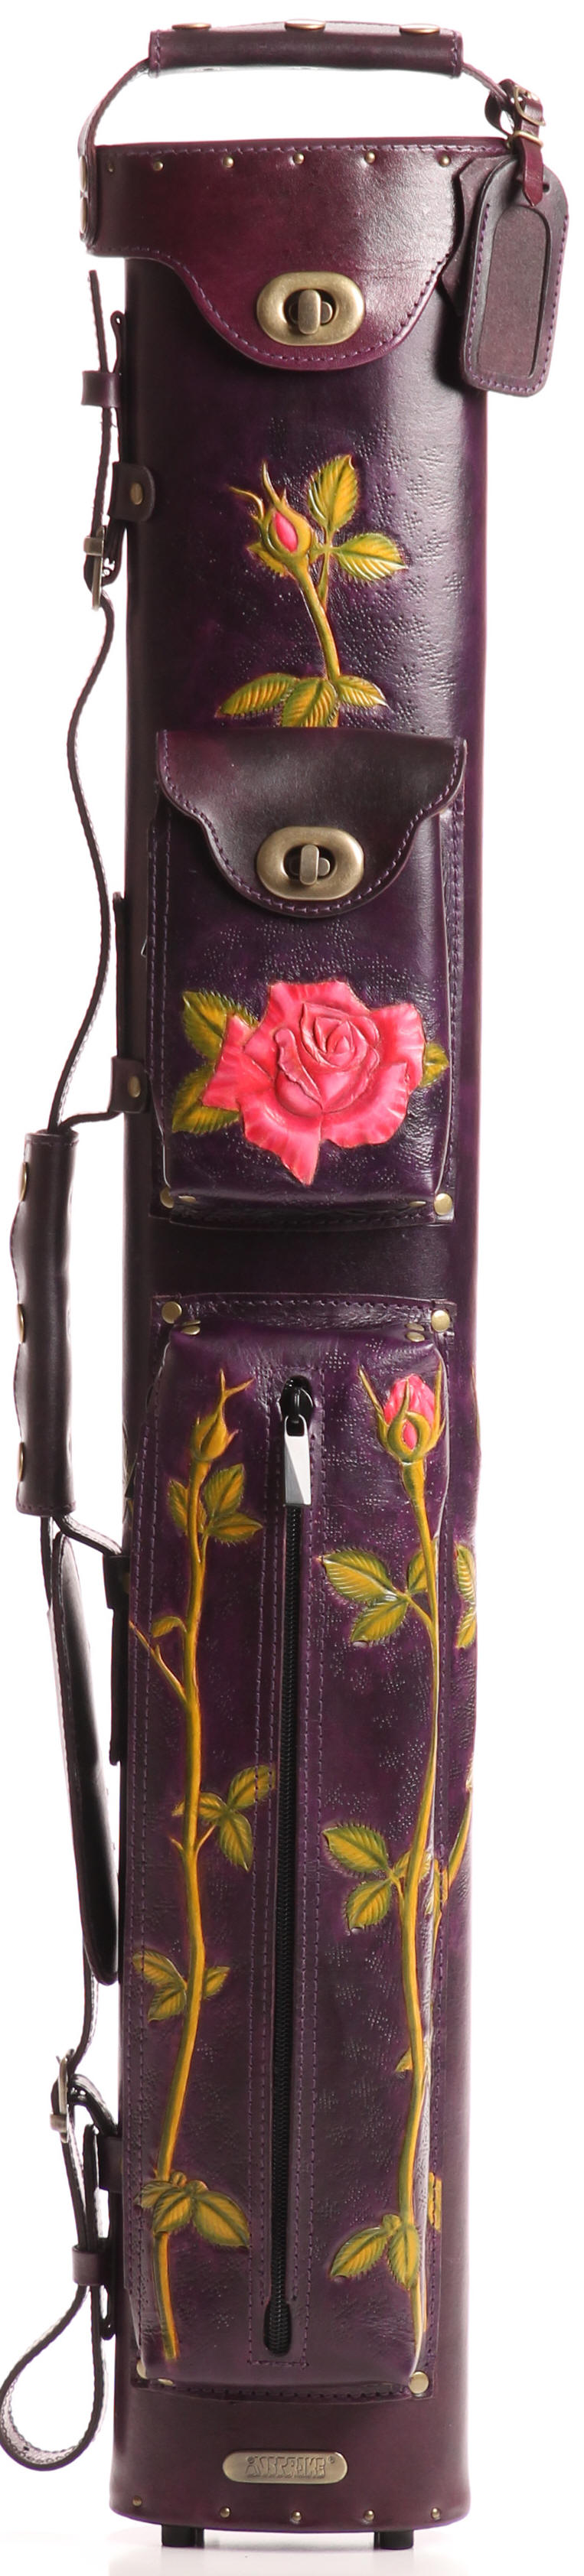 Instroke Red Rose Cue Case